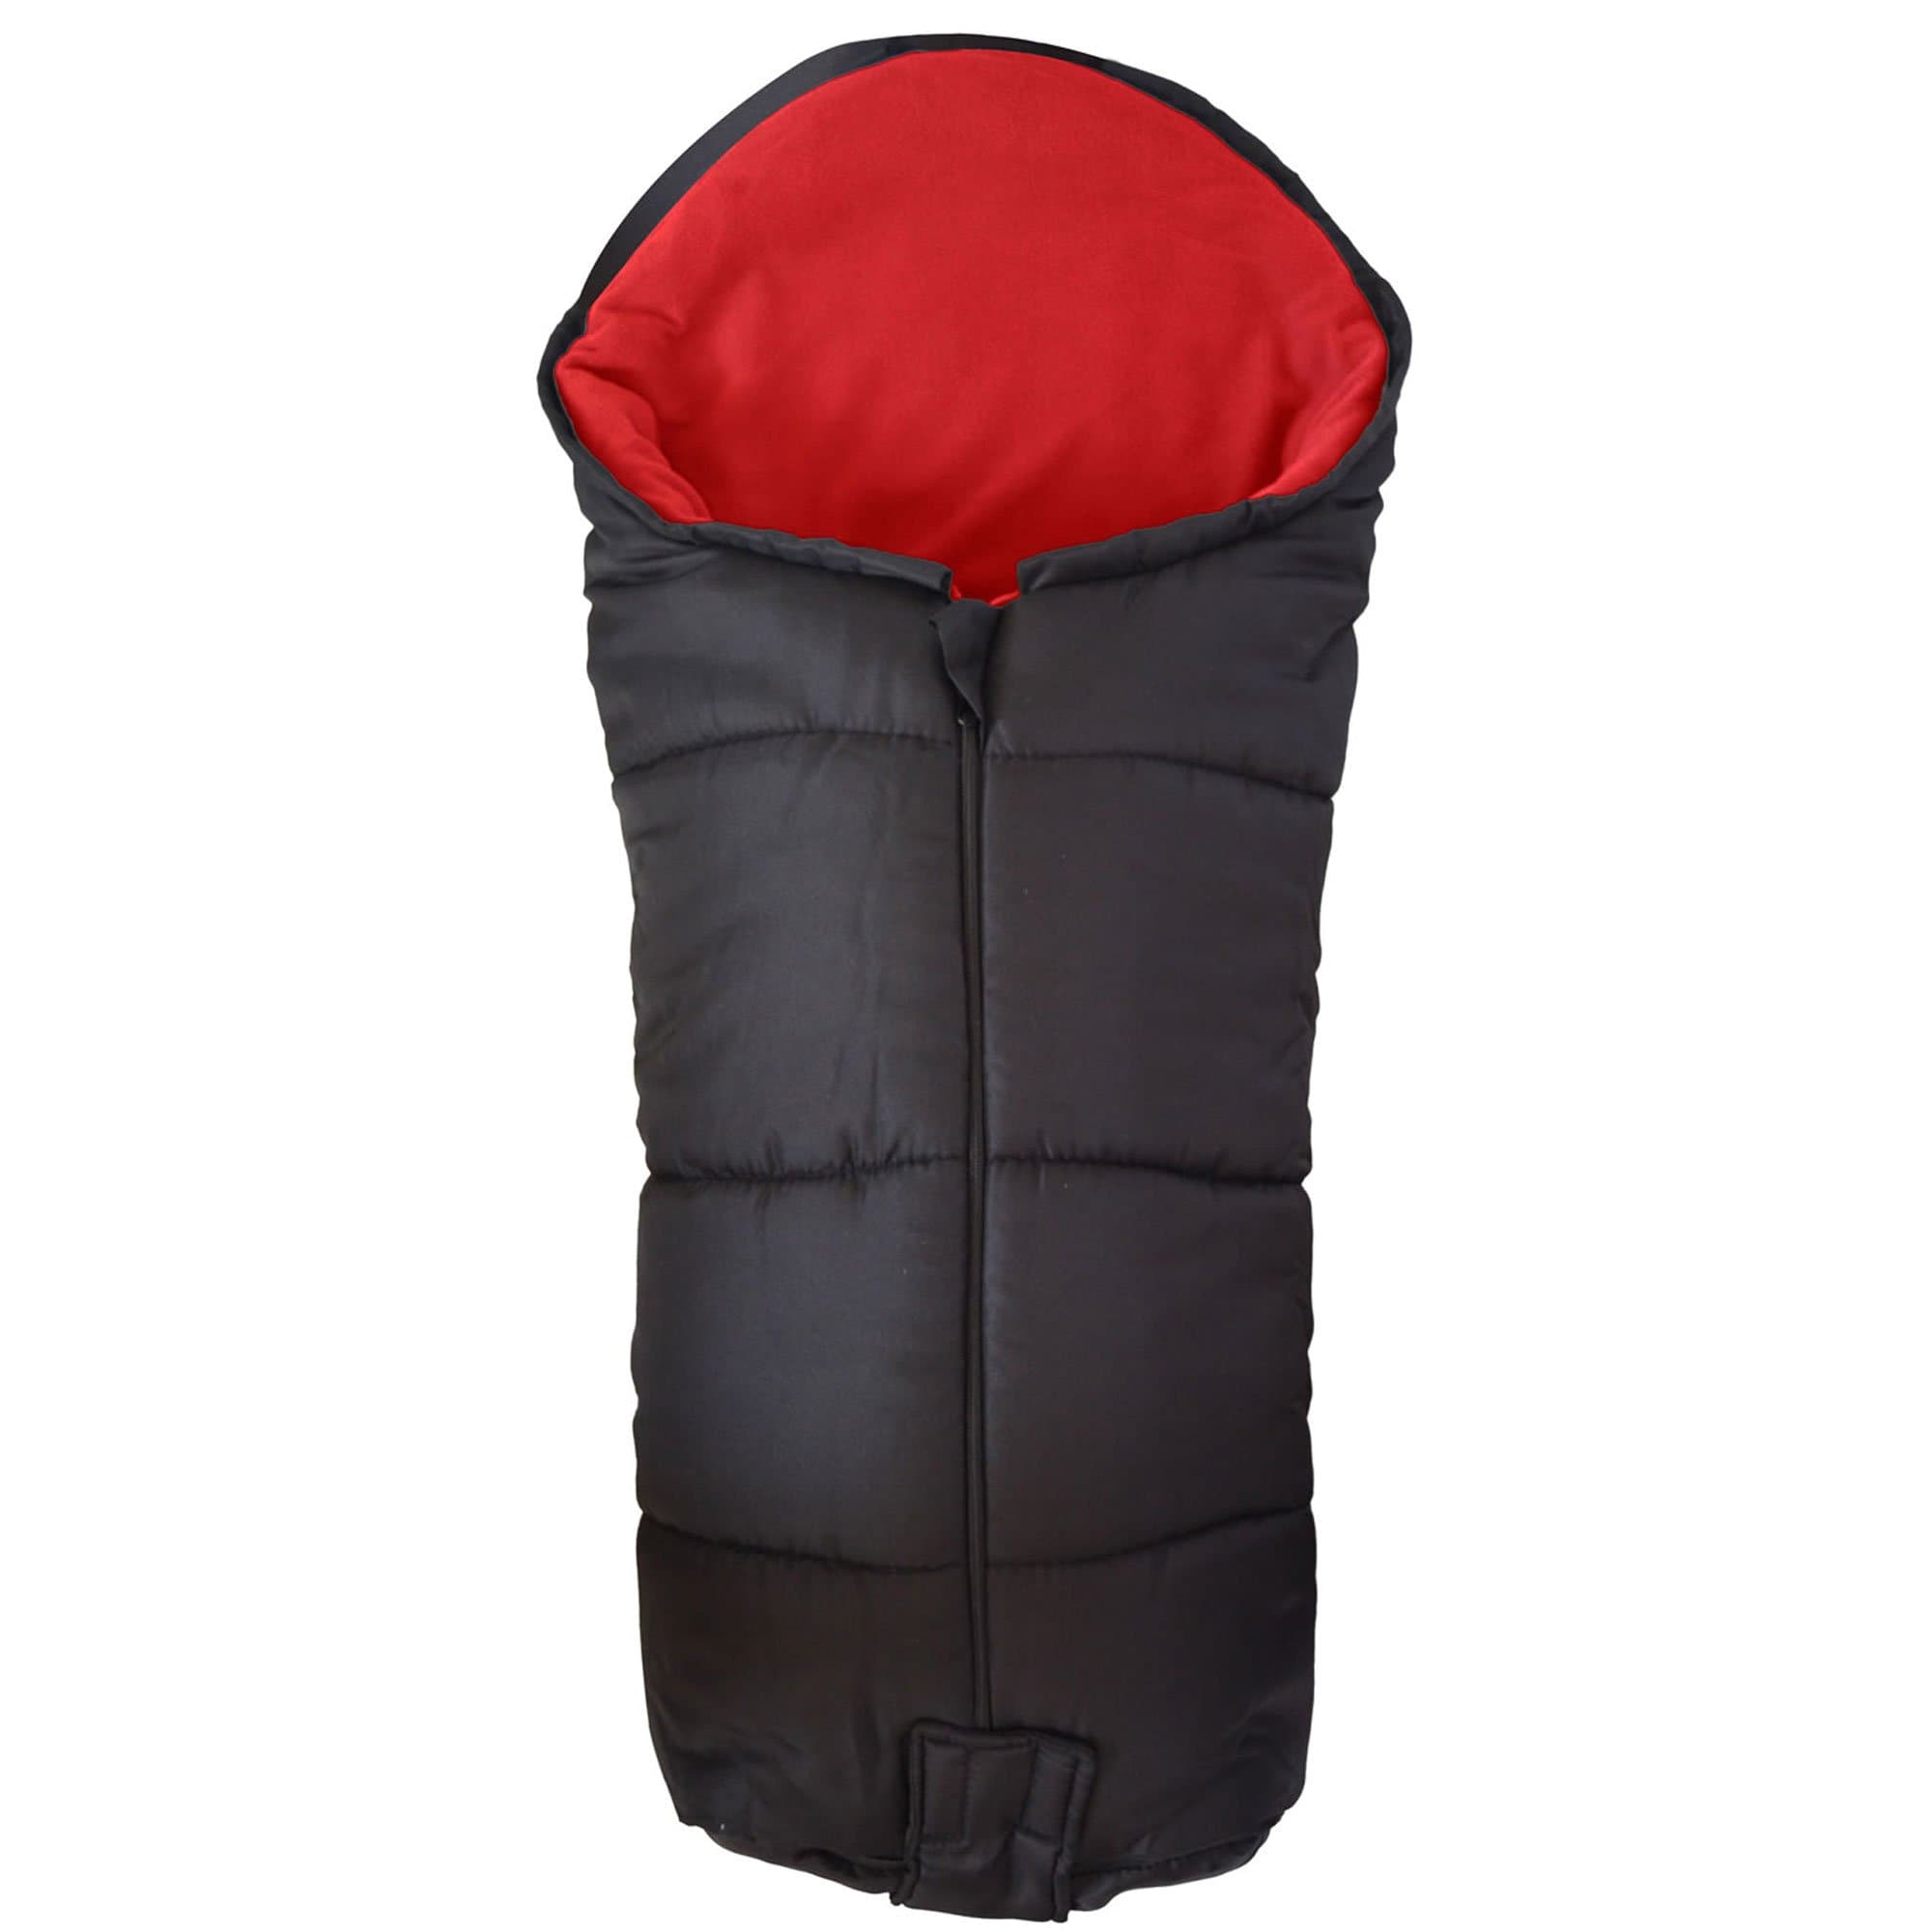 Universal Deluxe Pushchair Footmuff / Cosy Toes - Fits All Pushchairs / Prams And Buggies Red Fits All Models 